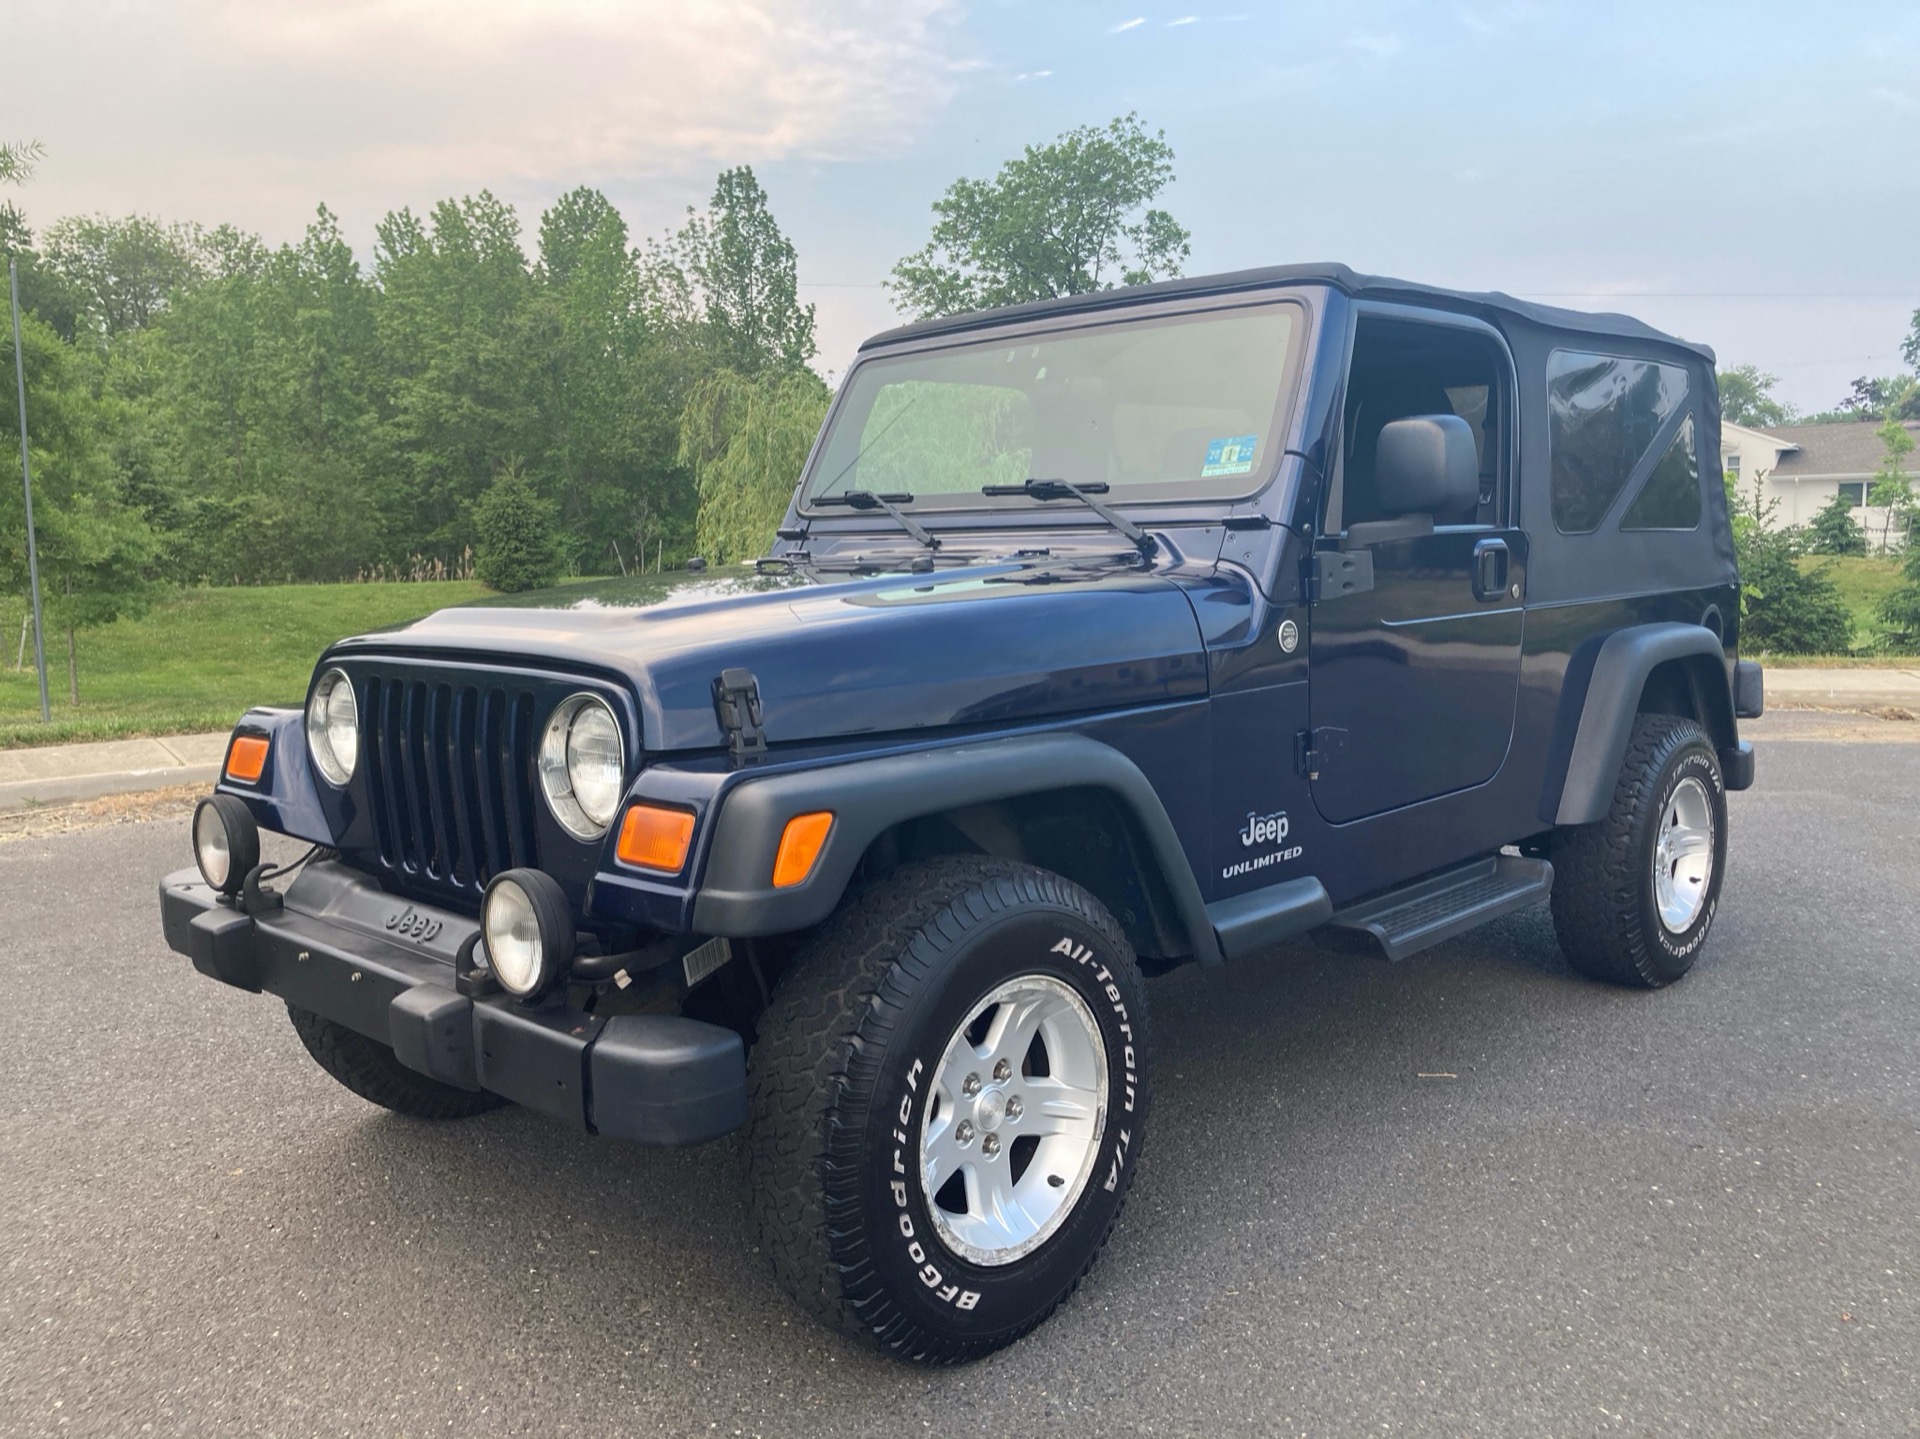 Used 2006 Jeep Wrangler Unlimited Unlimited For Sale ($15,900) | Legend  Leasing Stock #3778